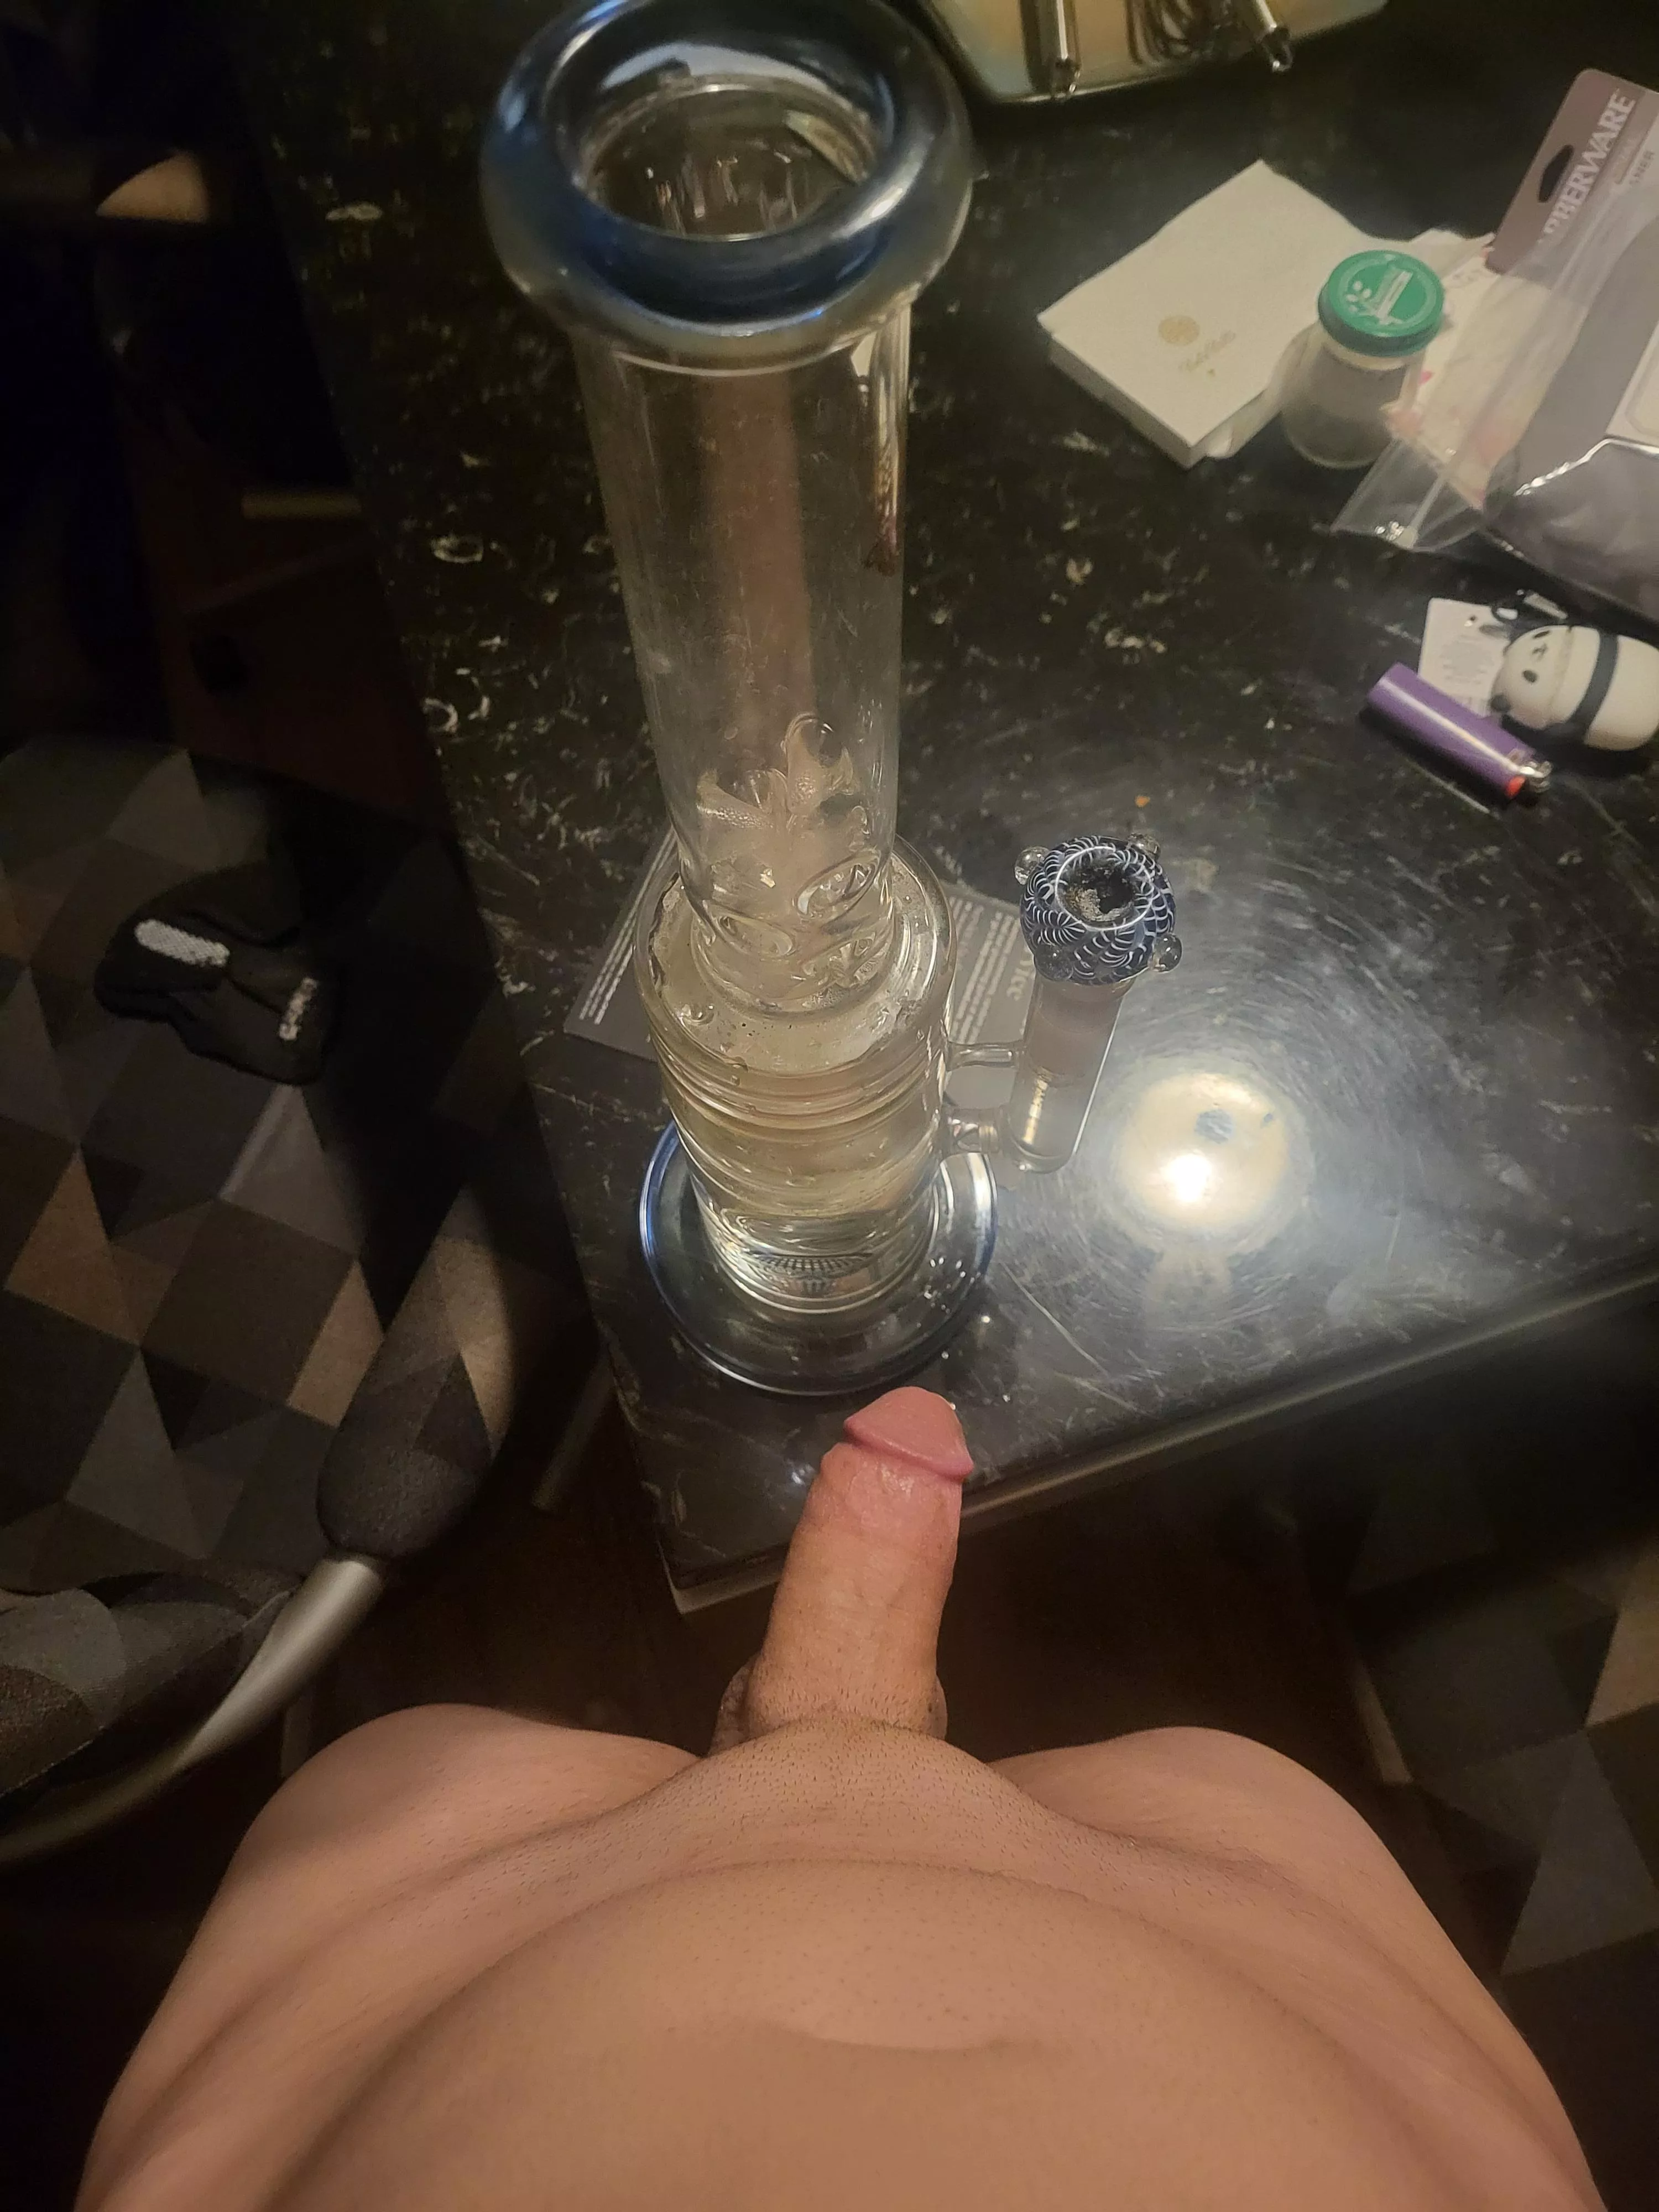 Midnight S M Oke Nudes By Cannabisexpress420